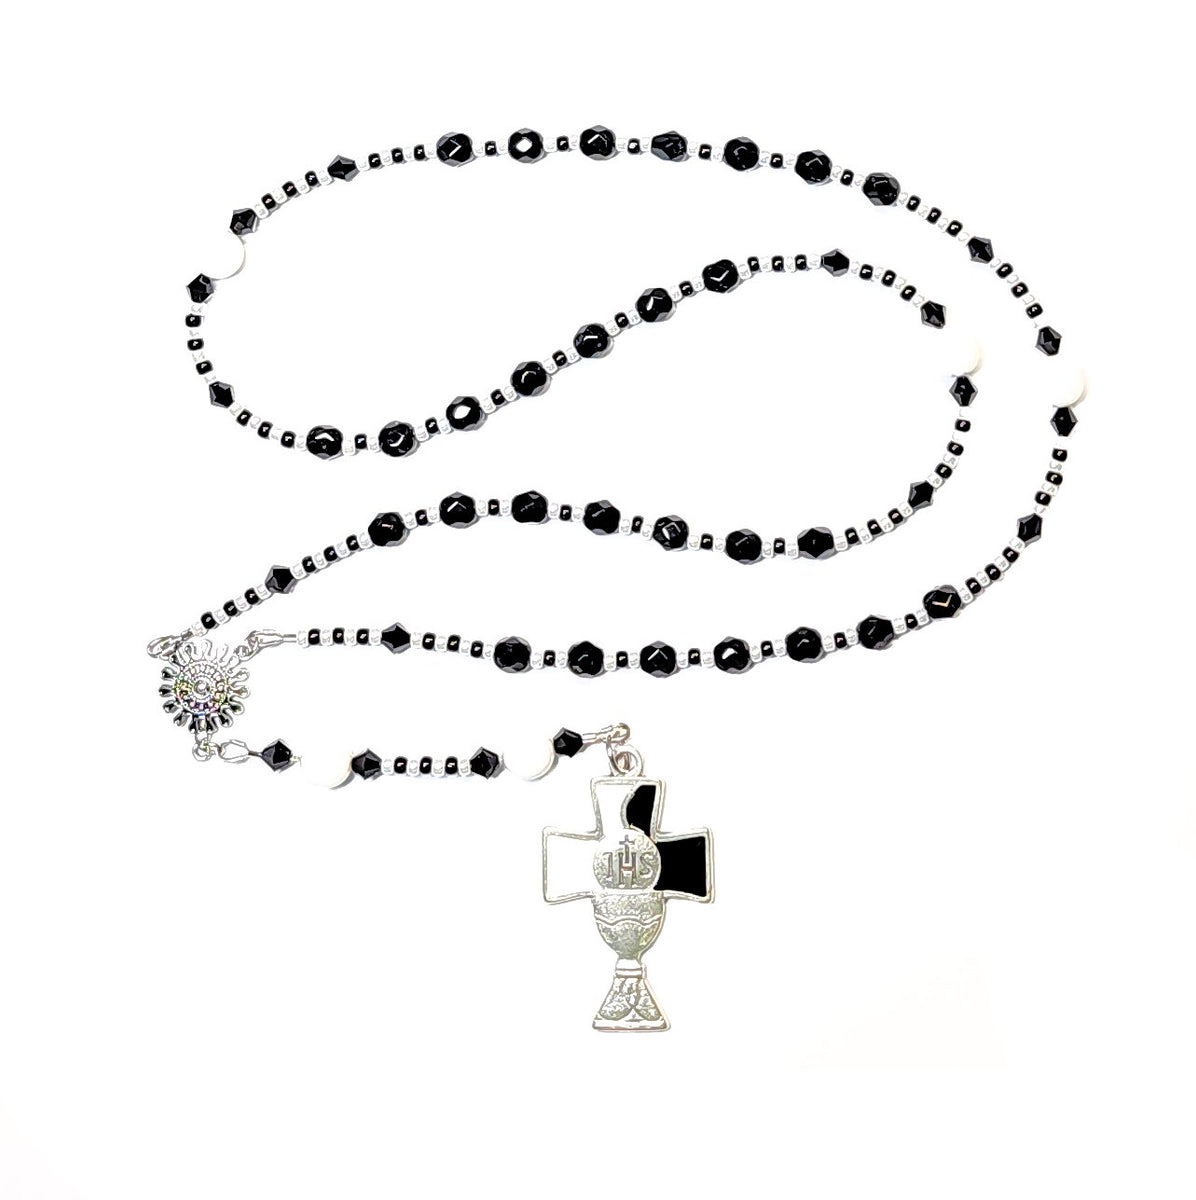 White Cloisonne small Rosary